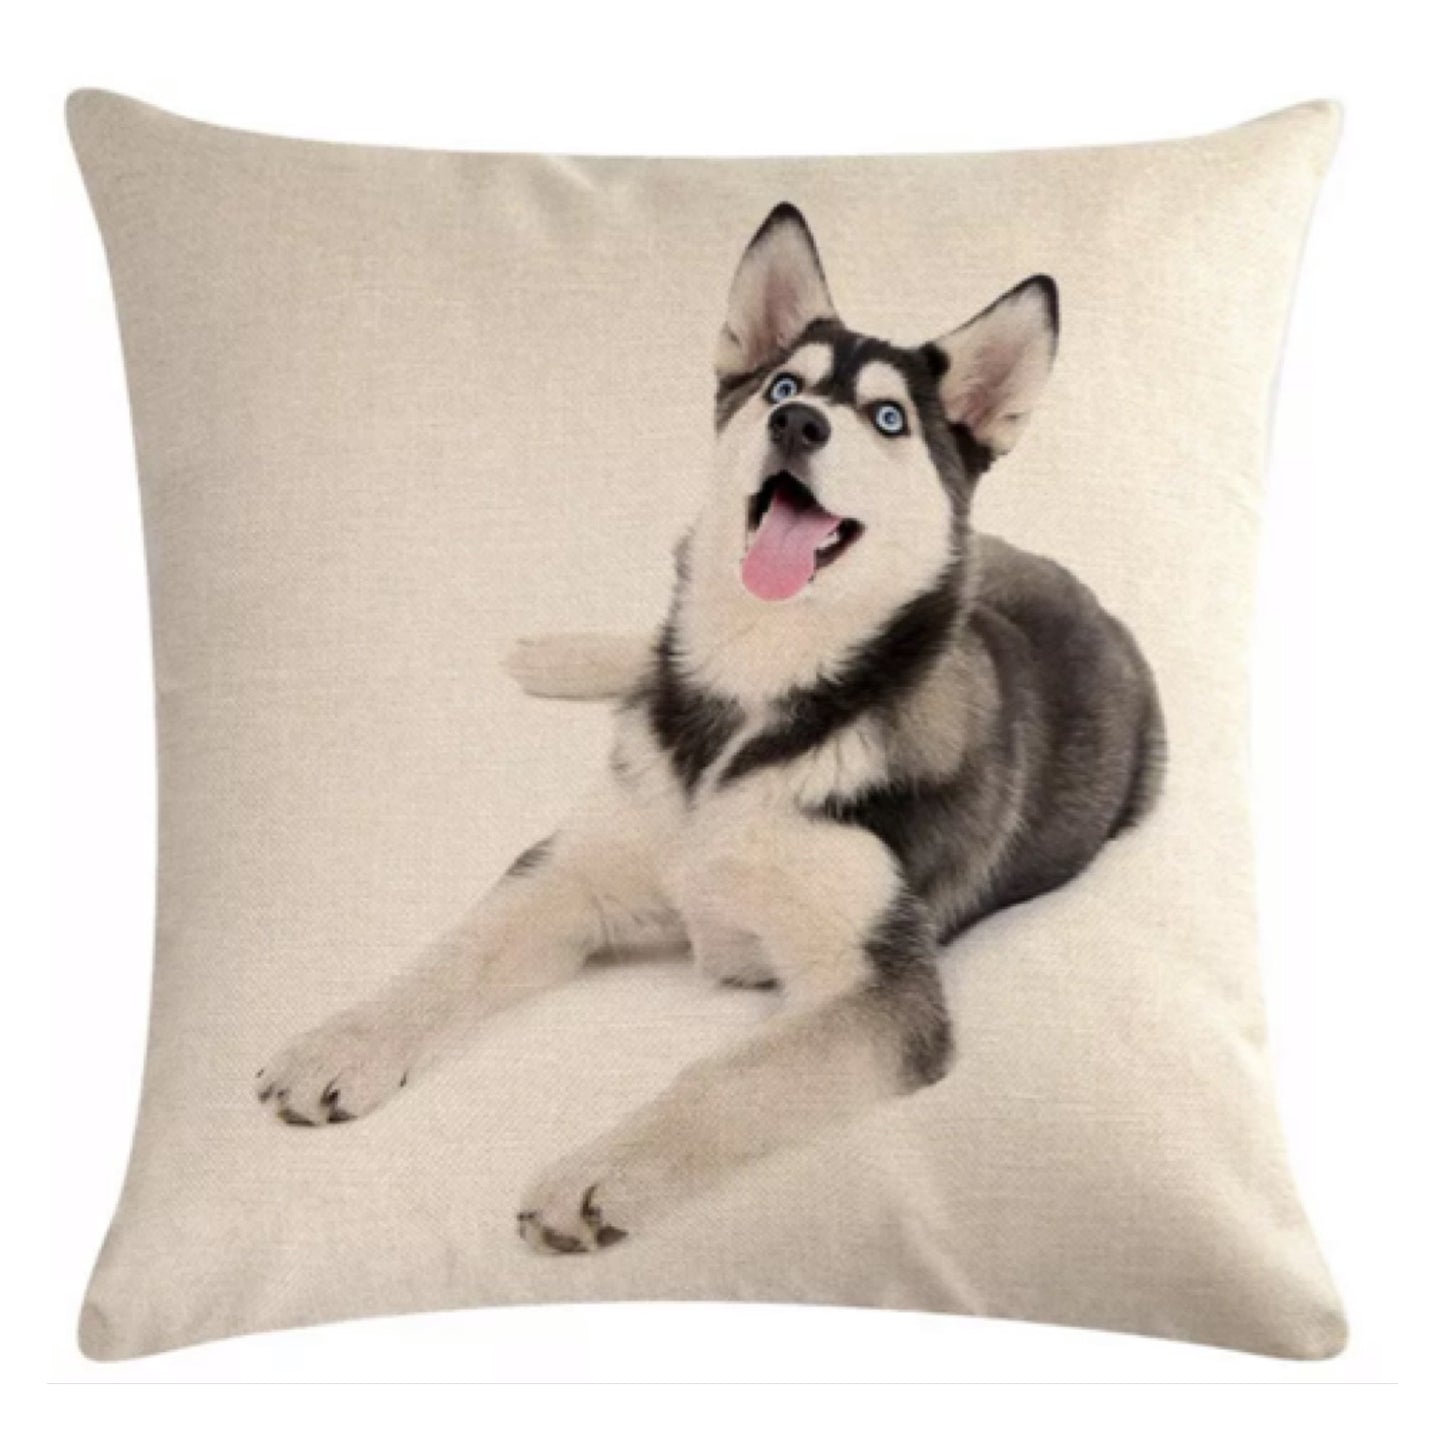 Cushion Cover Dog Husky Frank - The Renmy Store Homewares & Gifts 